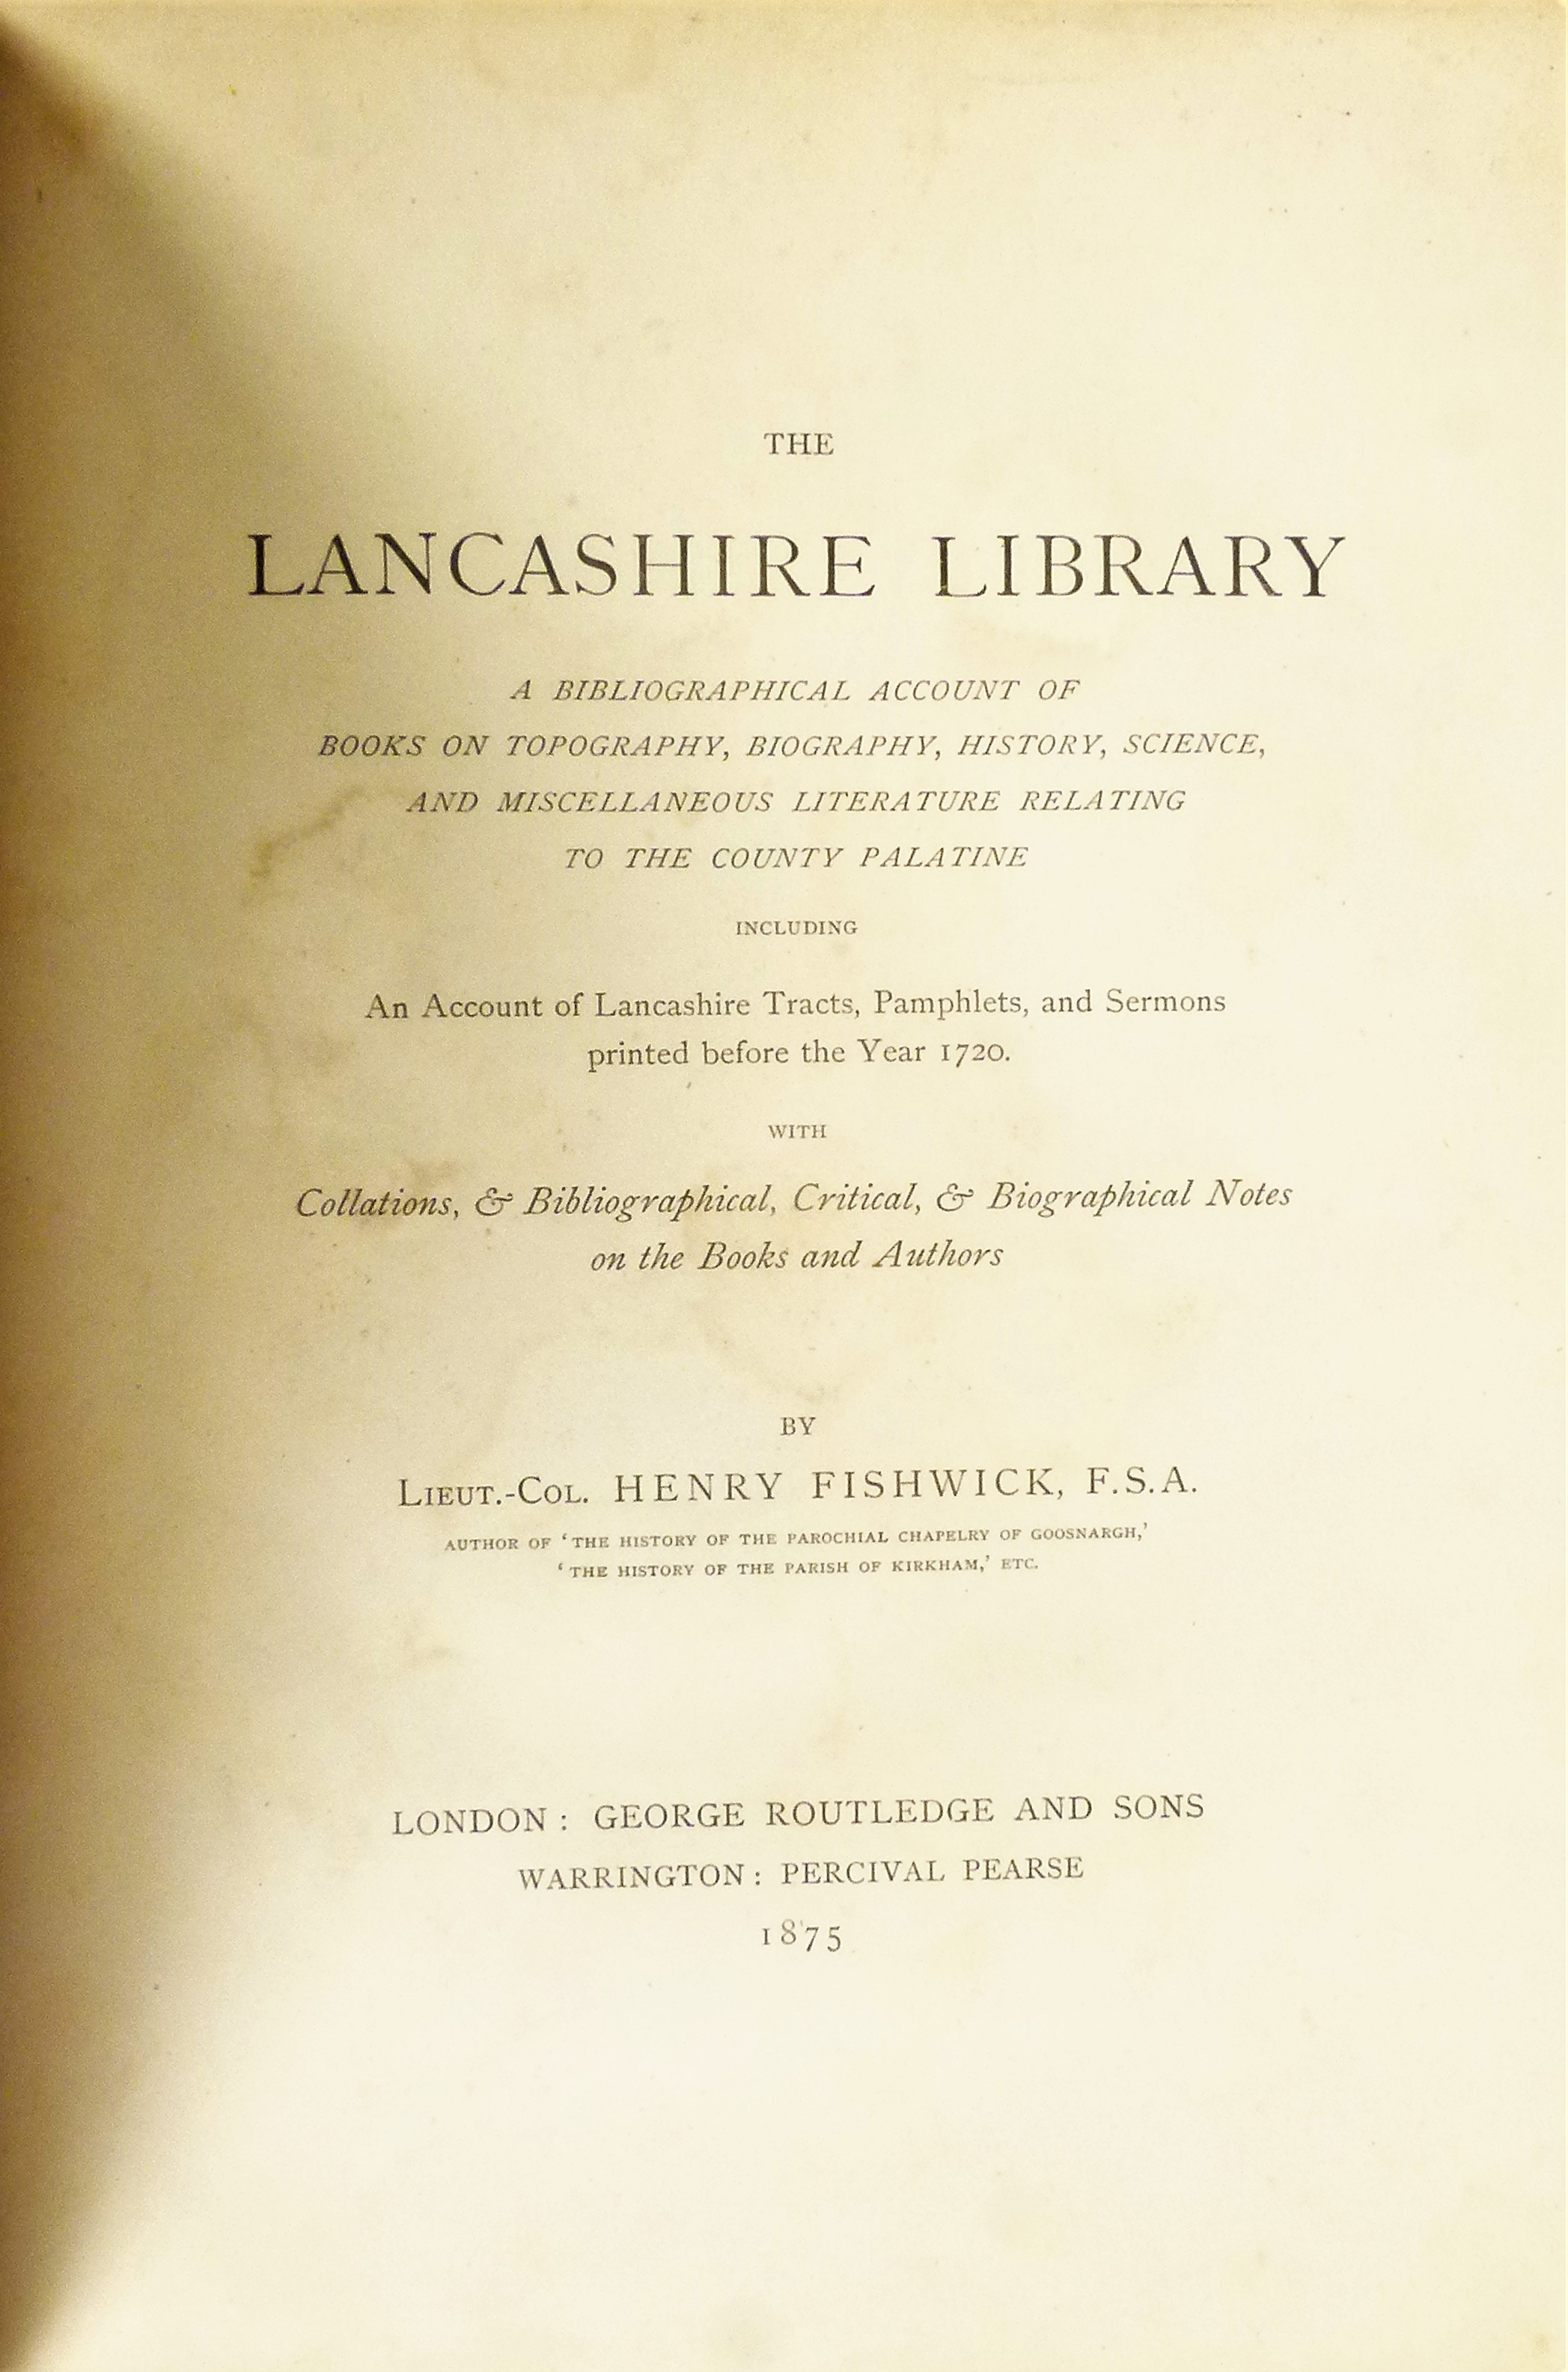 Fishwick (Henry), THE LANCASHIRE LIBRARY, Large Paper Copy, - Image 3 of 3